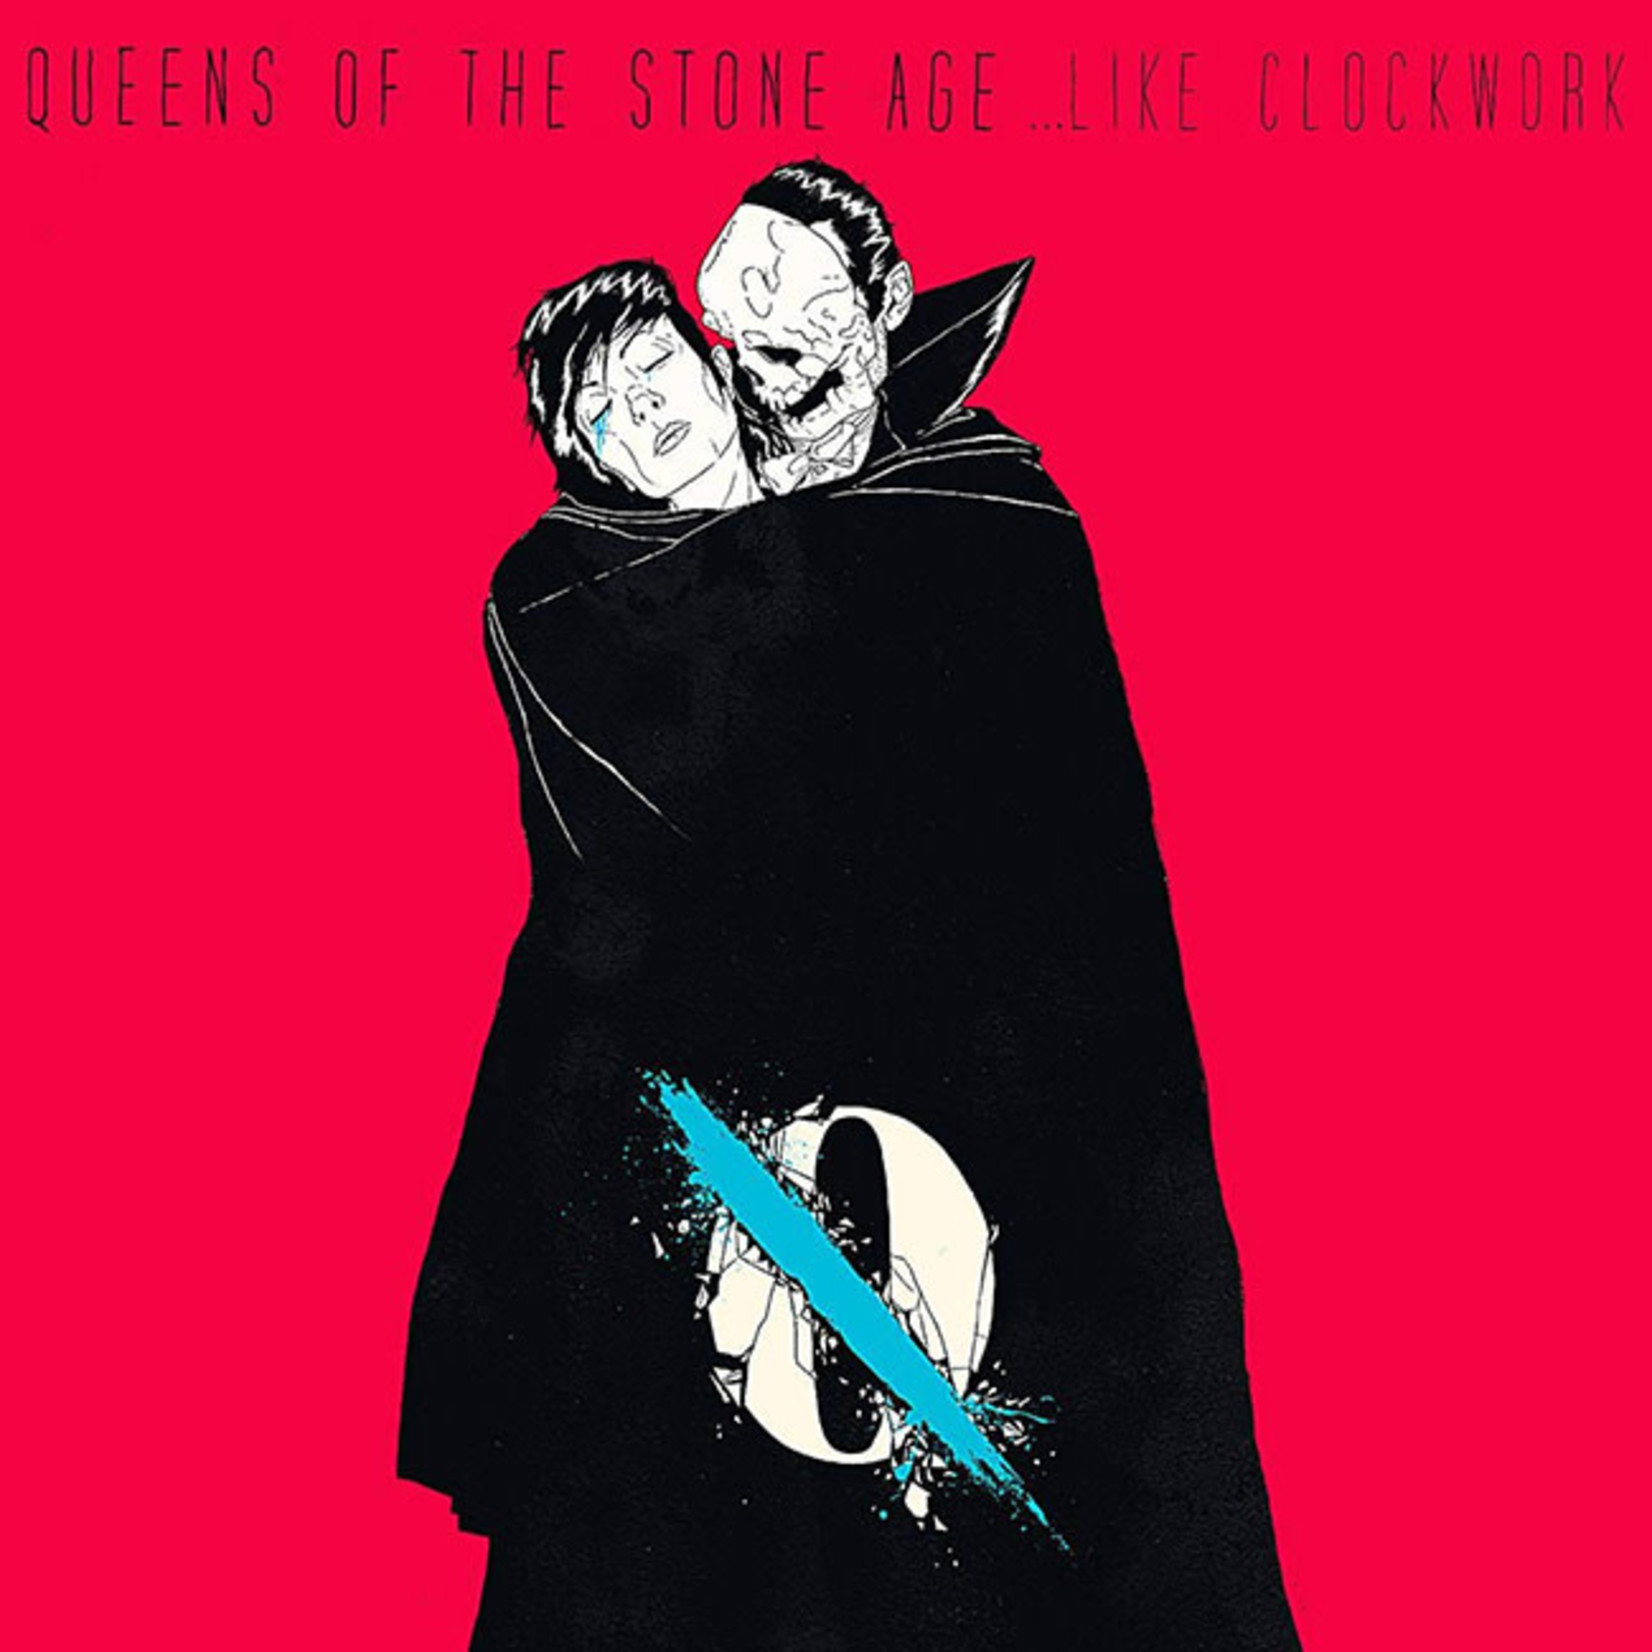 [New] Queens Of The Stone Age - Like Clockwork (2LP)